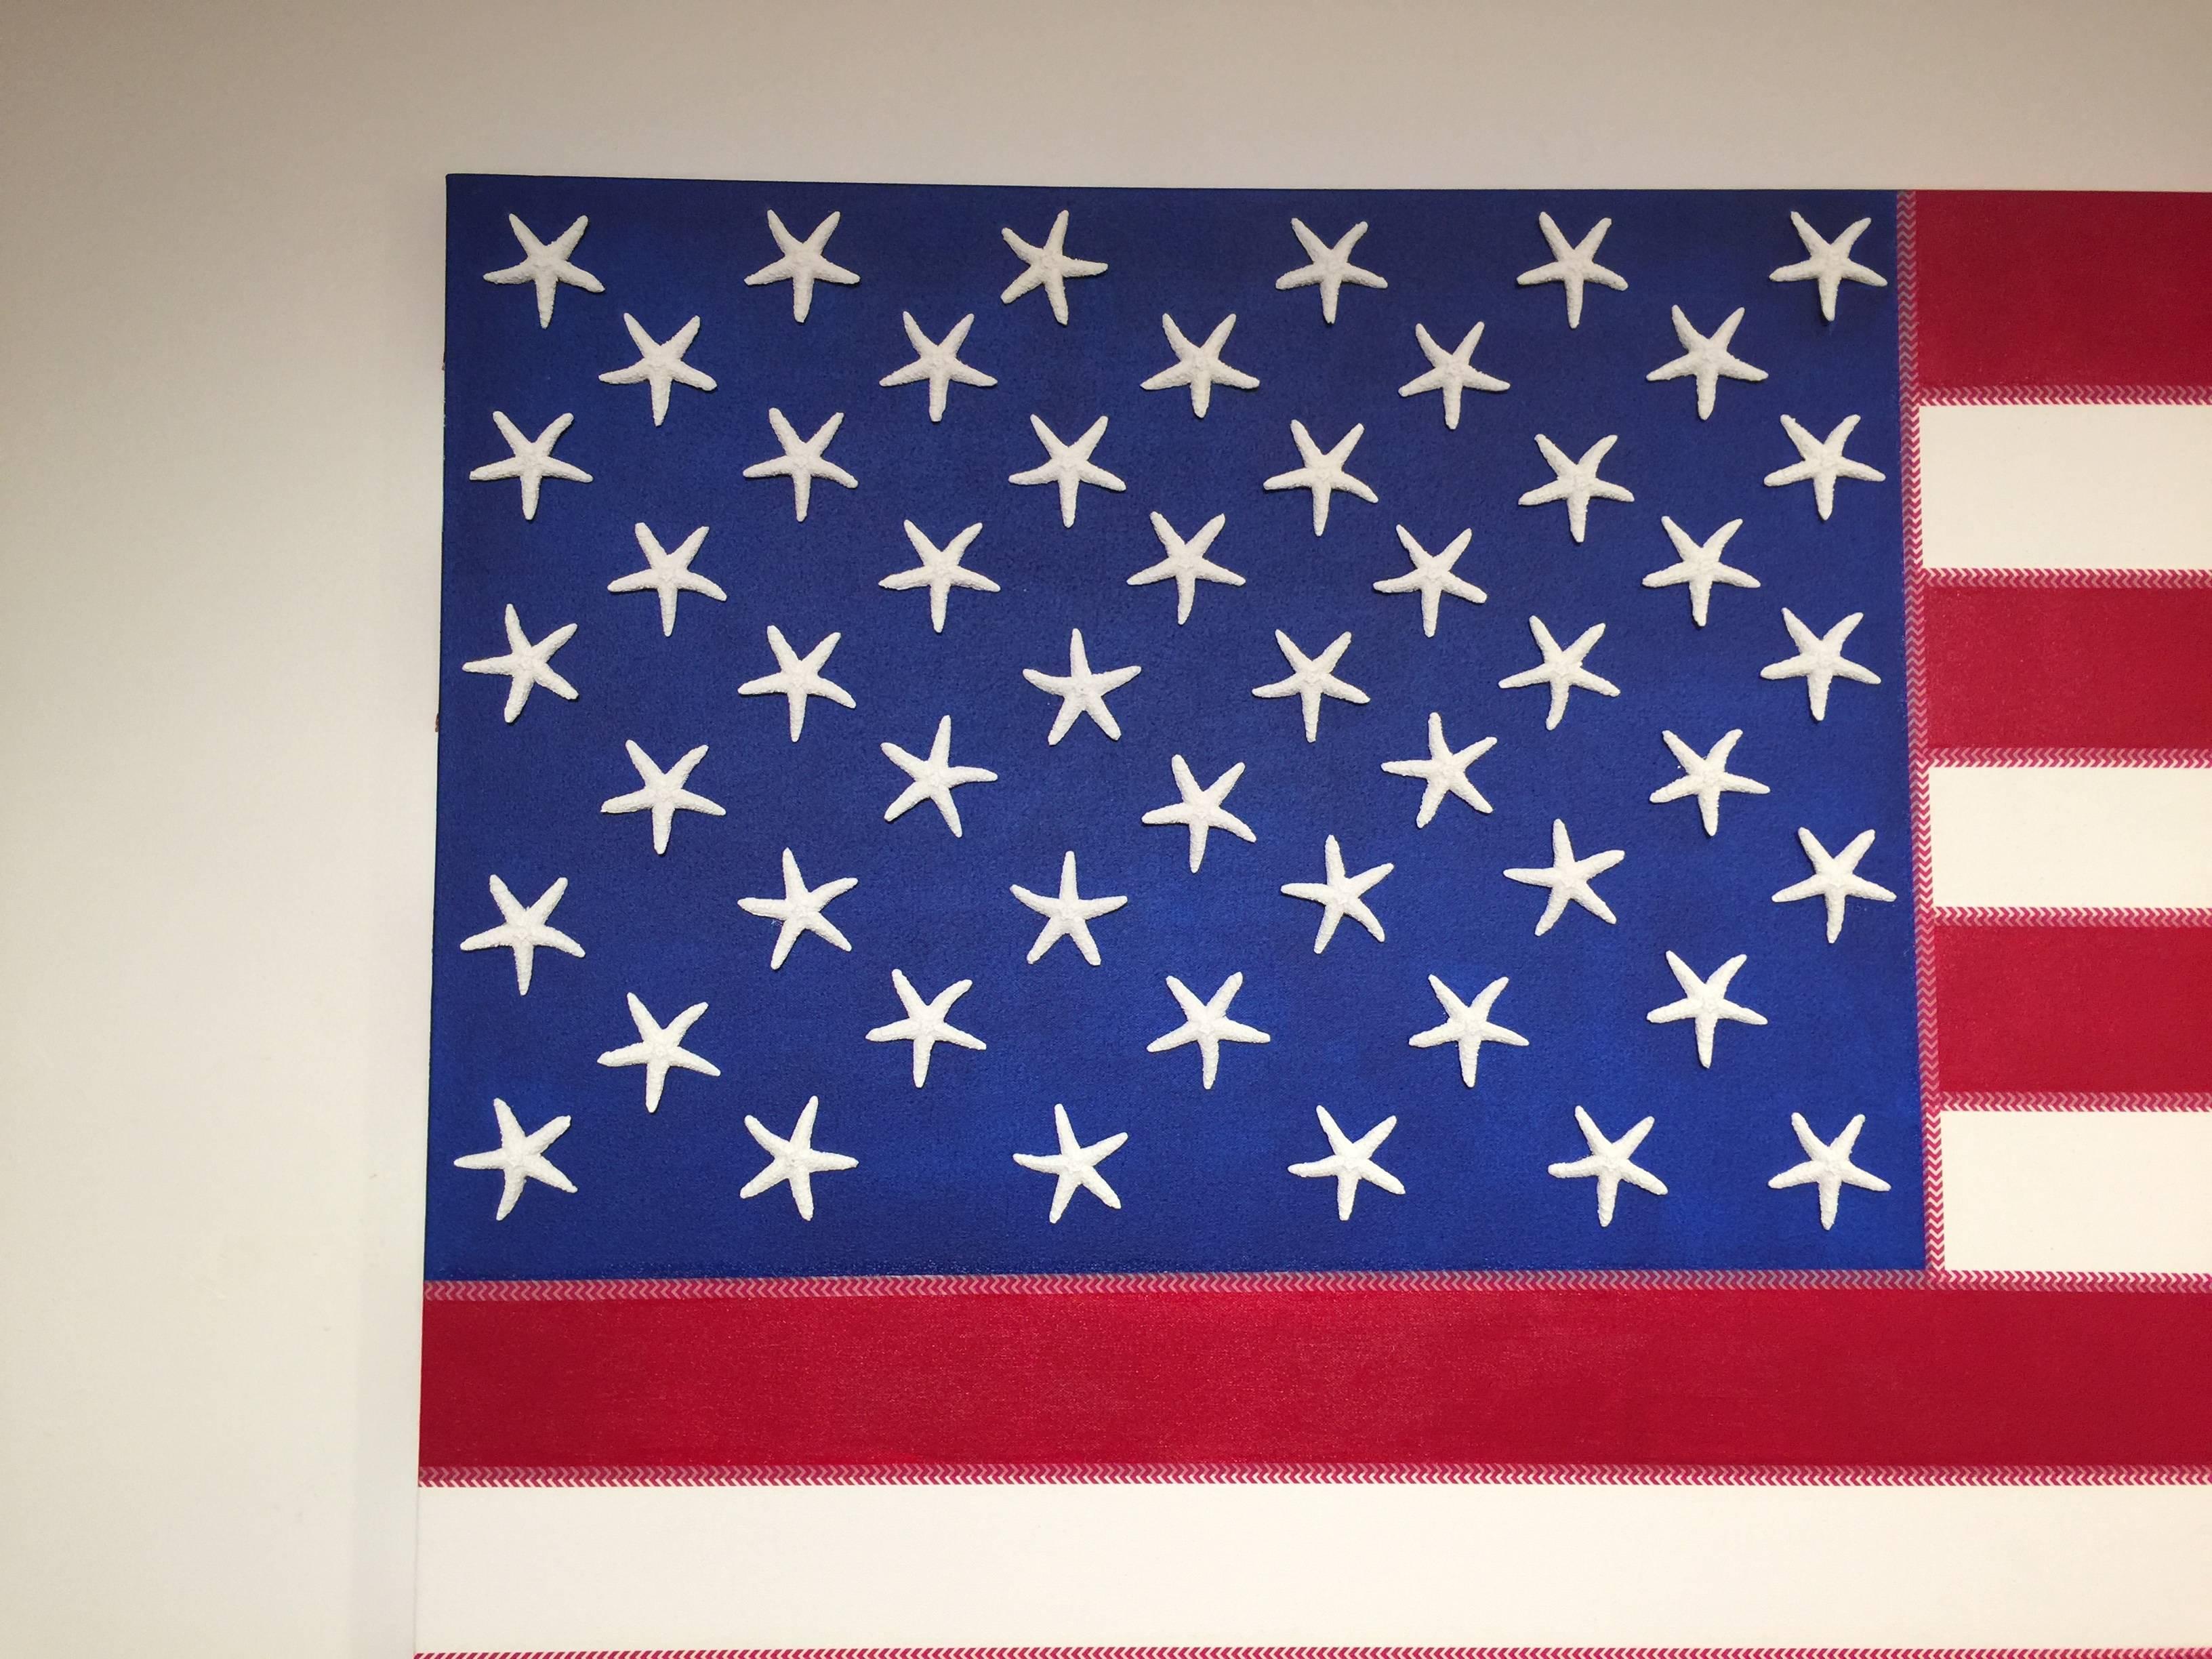 J. WOHNSEIDLER American Flag No. 1, 2017 Acrylic on Canvas In Excellent Condition For Sale In New York, NY